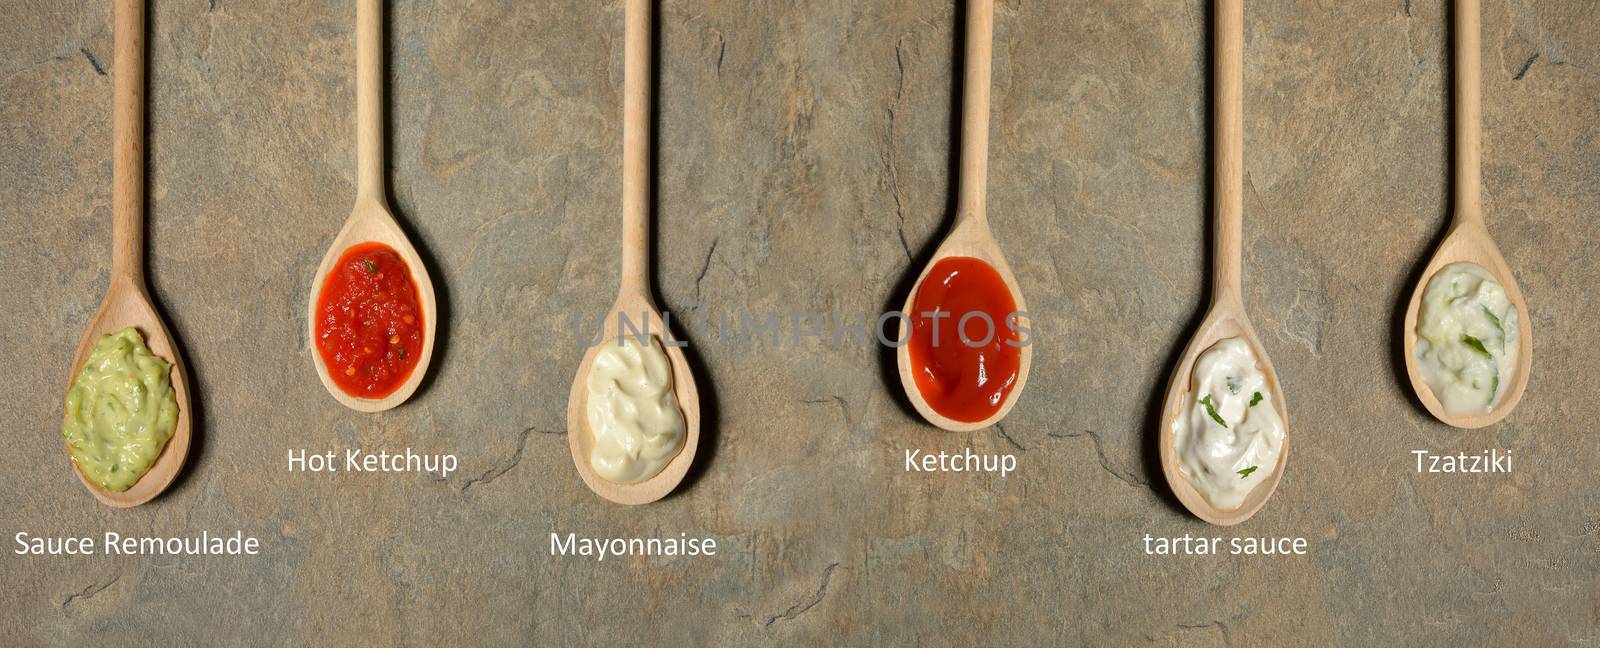 different types of sauces in spoons  by mady70